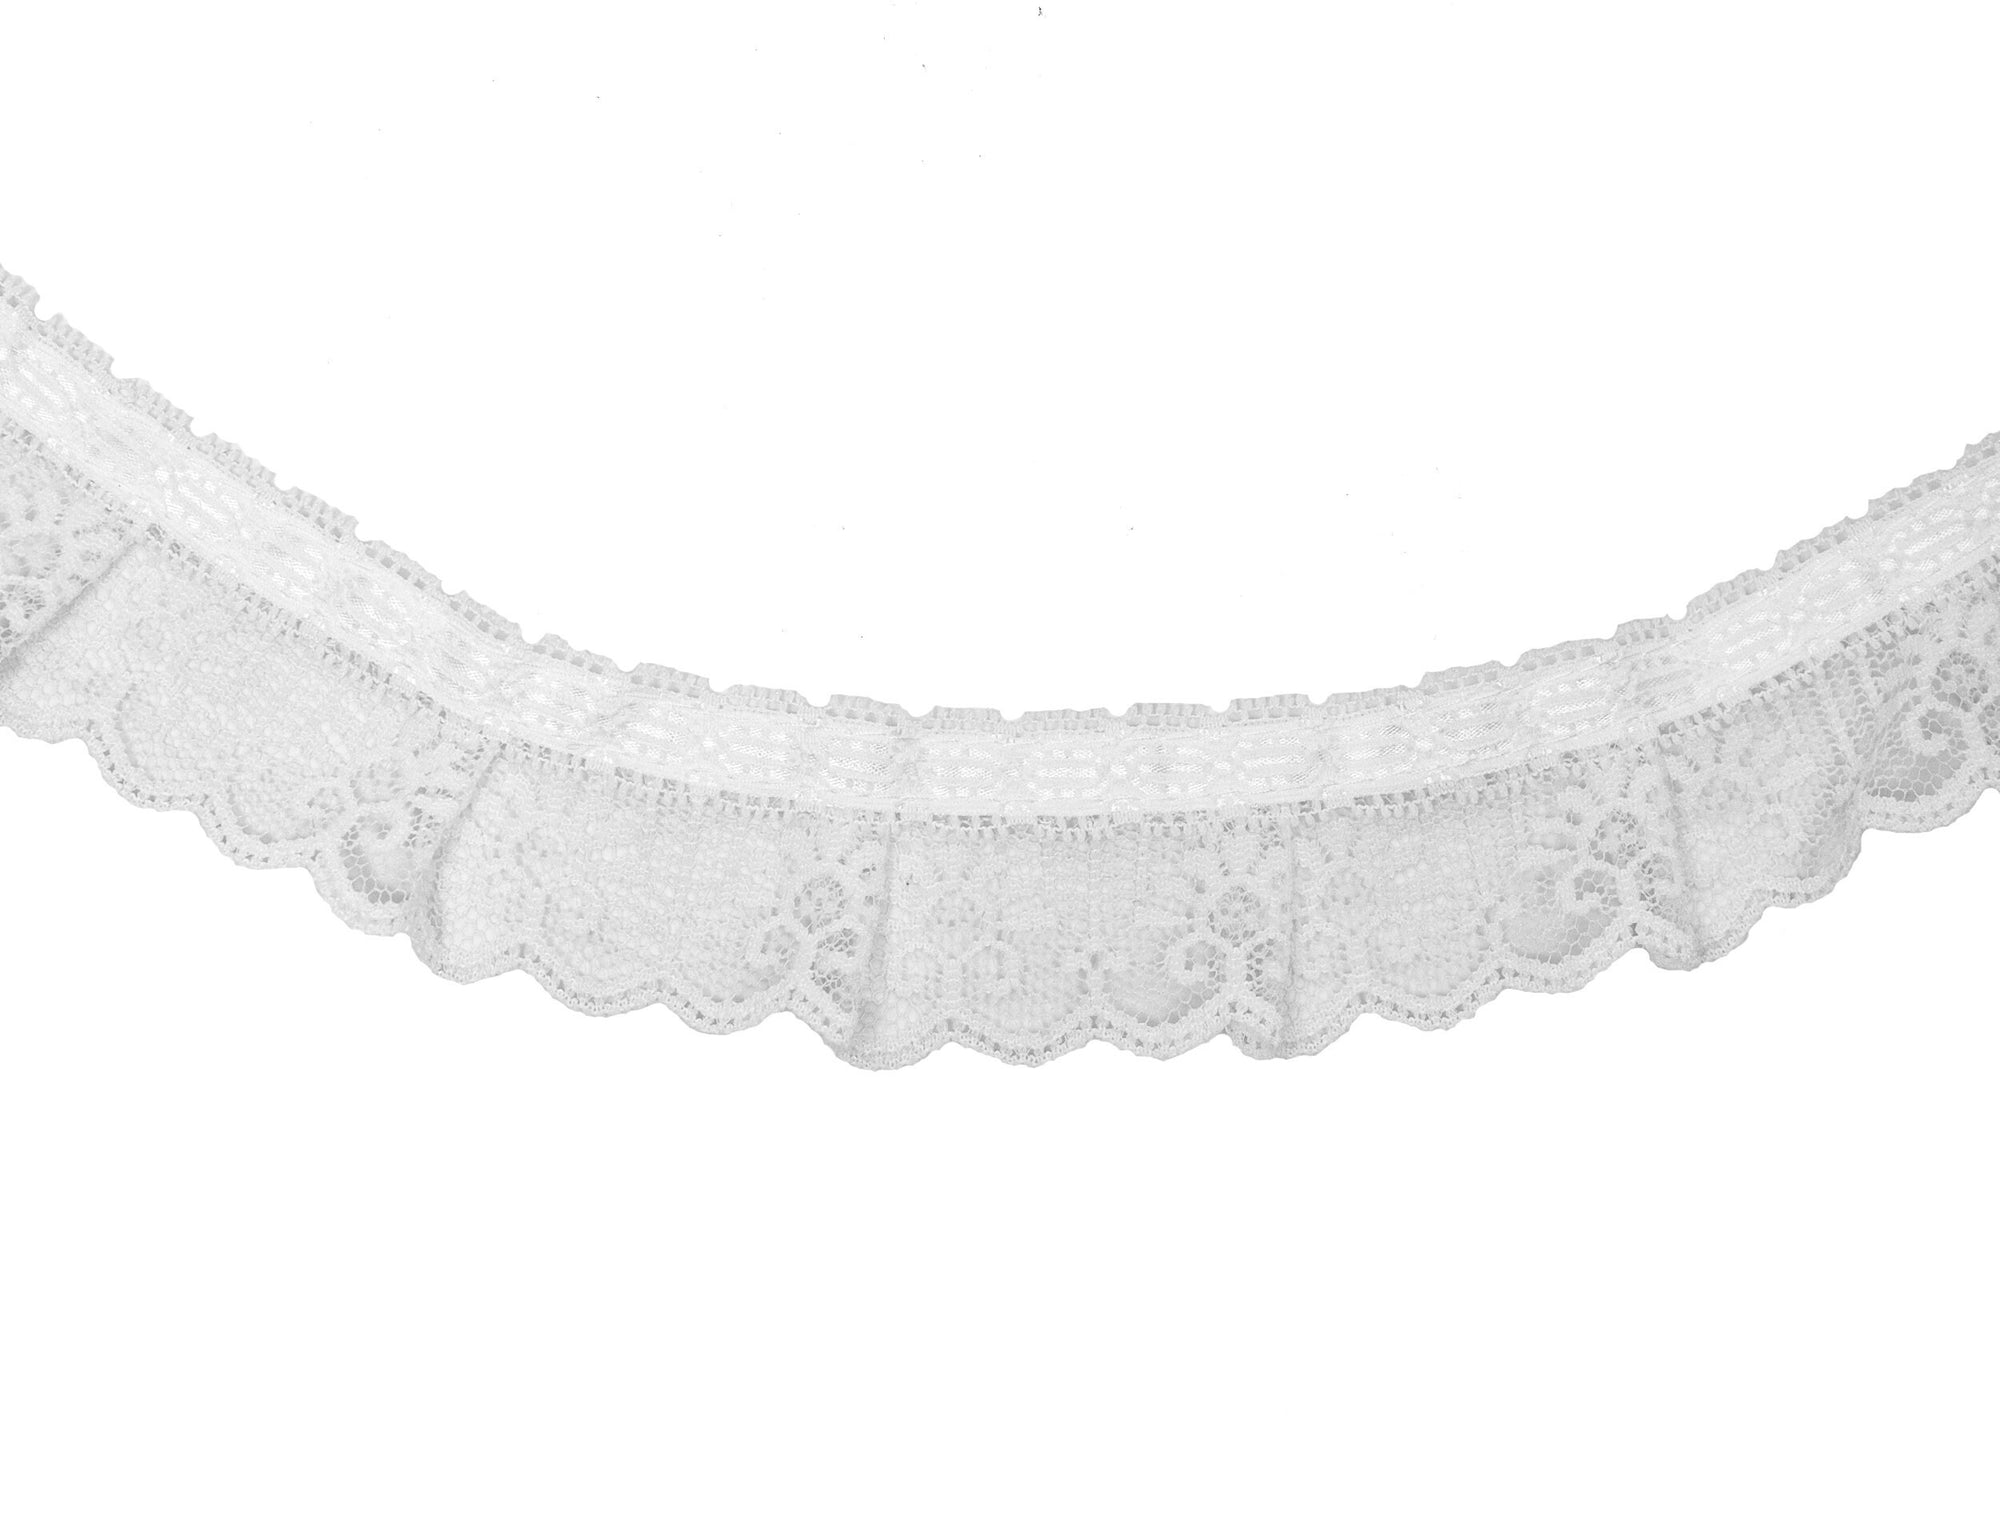 Vintage Lace White Ruffle with Satin Ribbon Edge 1 3/4" Wide - One Piece 2 Yards Length